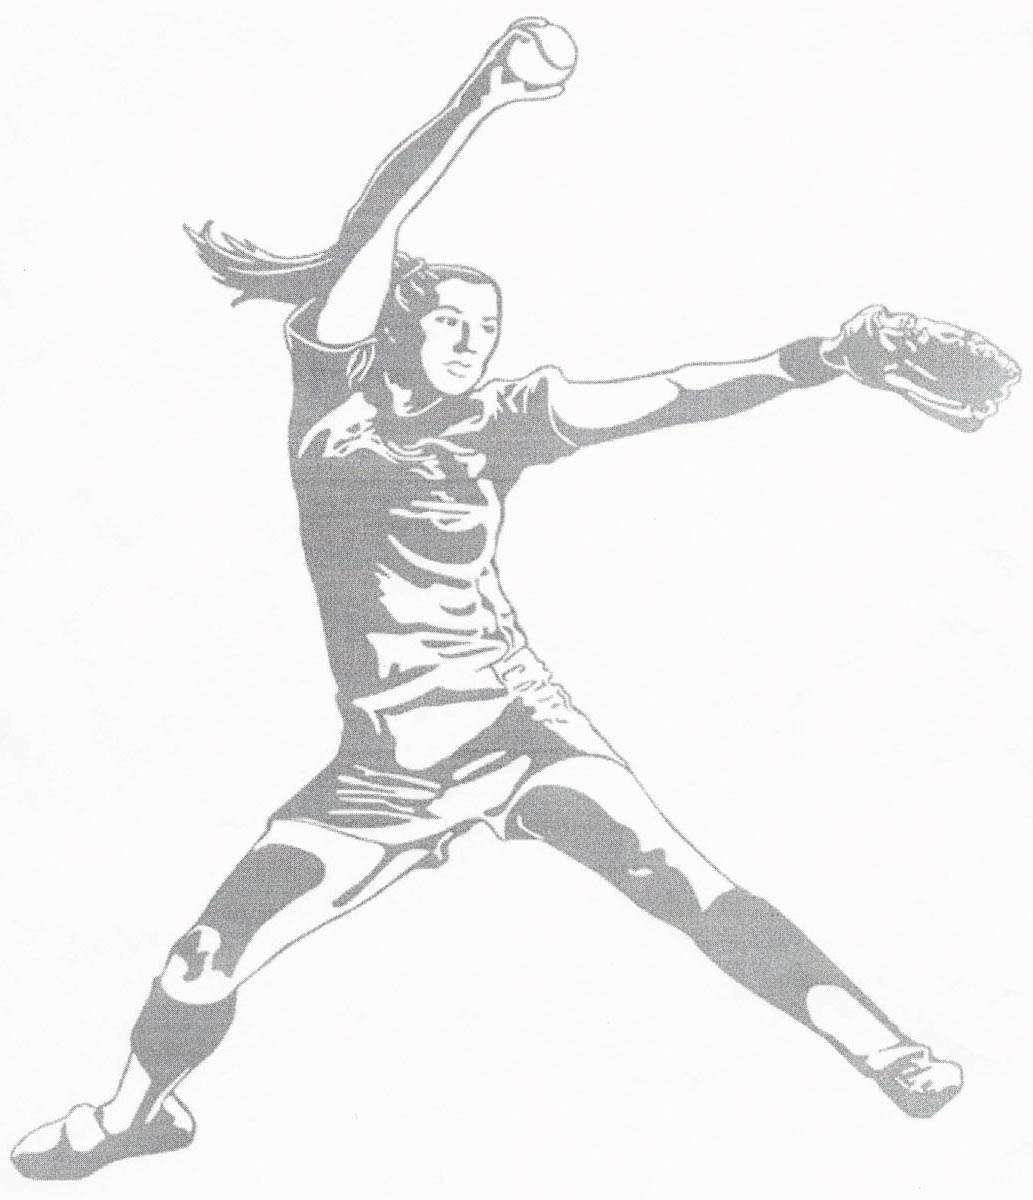 This black and white image, Softball Girl, was donated by the artist, Chris Gunn. Click to read more about Chris.